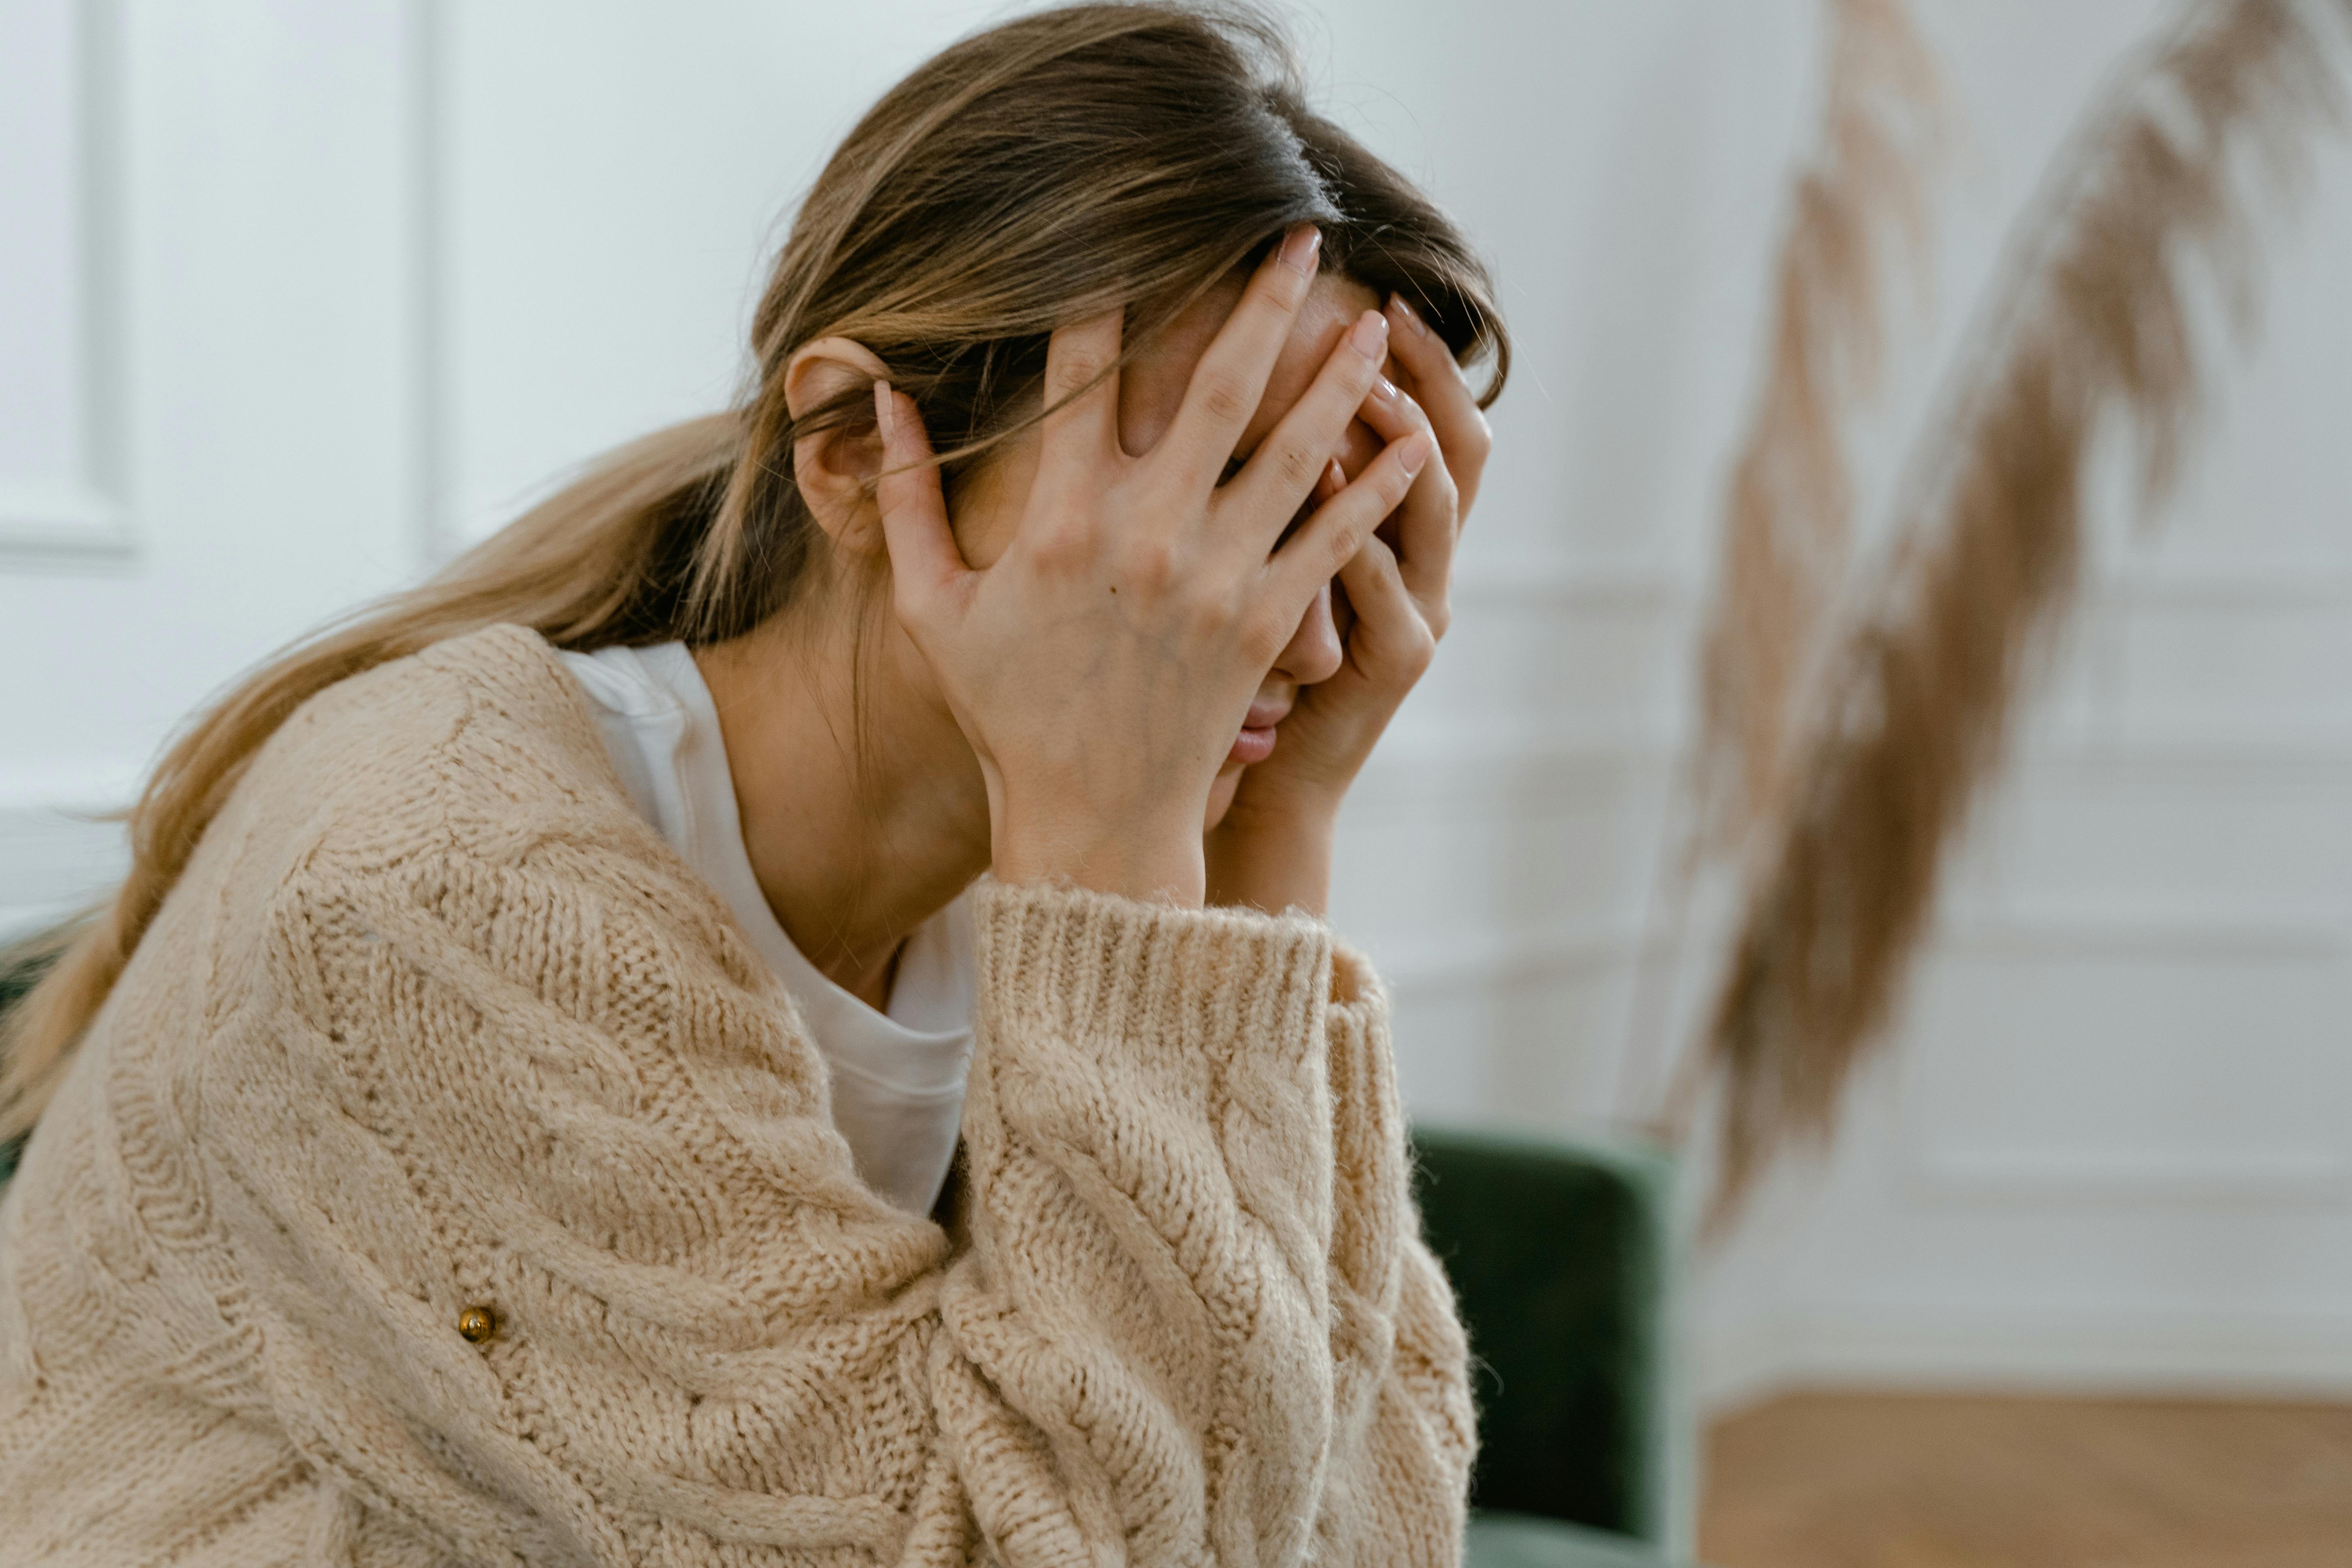 An upset woman covering her face with her hands | Source: Pexels